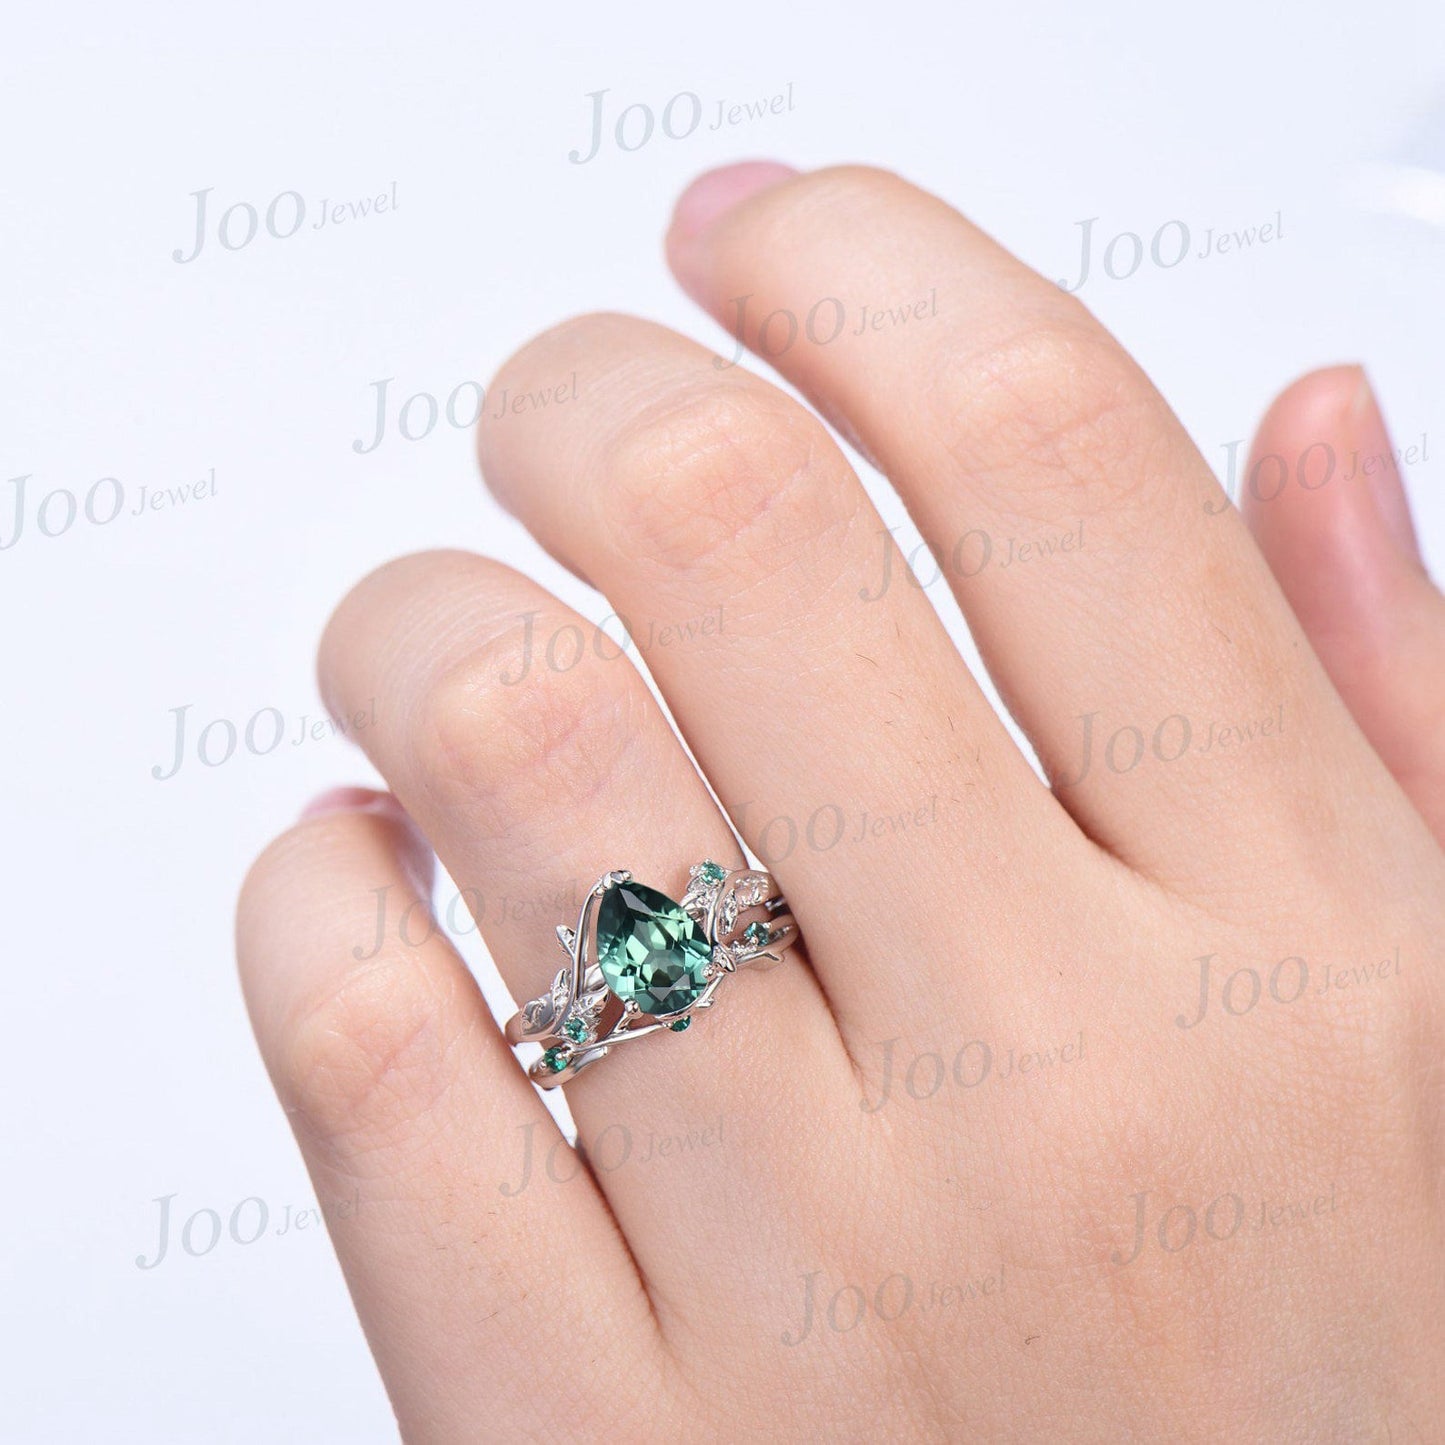 1.25ct Pear Cut Nature Inspired Green Sapphire Engagement Ring Set 10K White Gold Teal Sapphire Green Emerald Ring Unique Wedding Ring Women